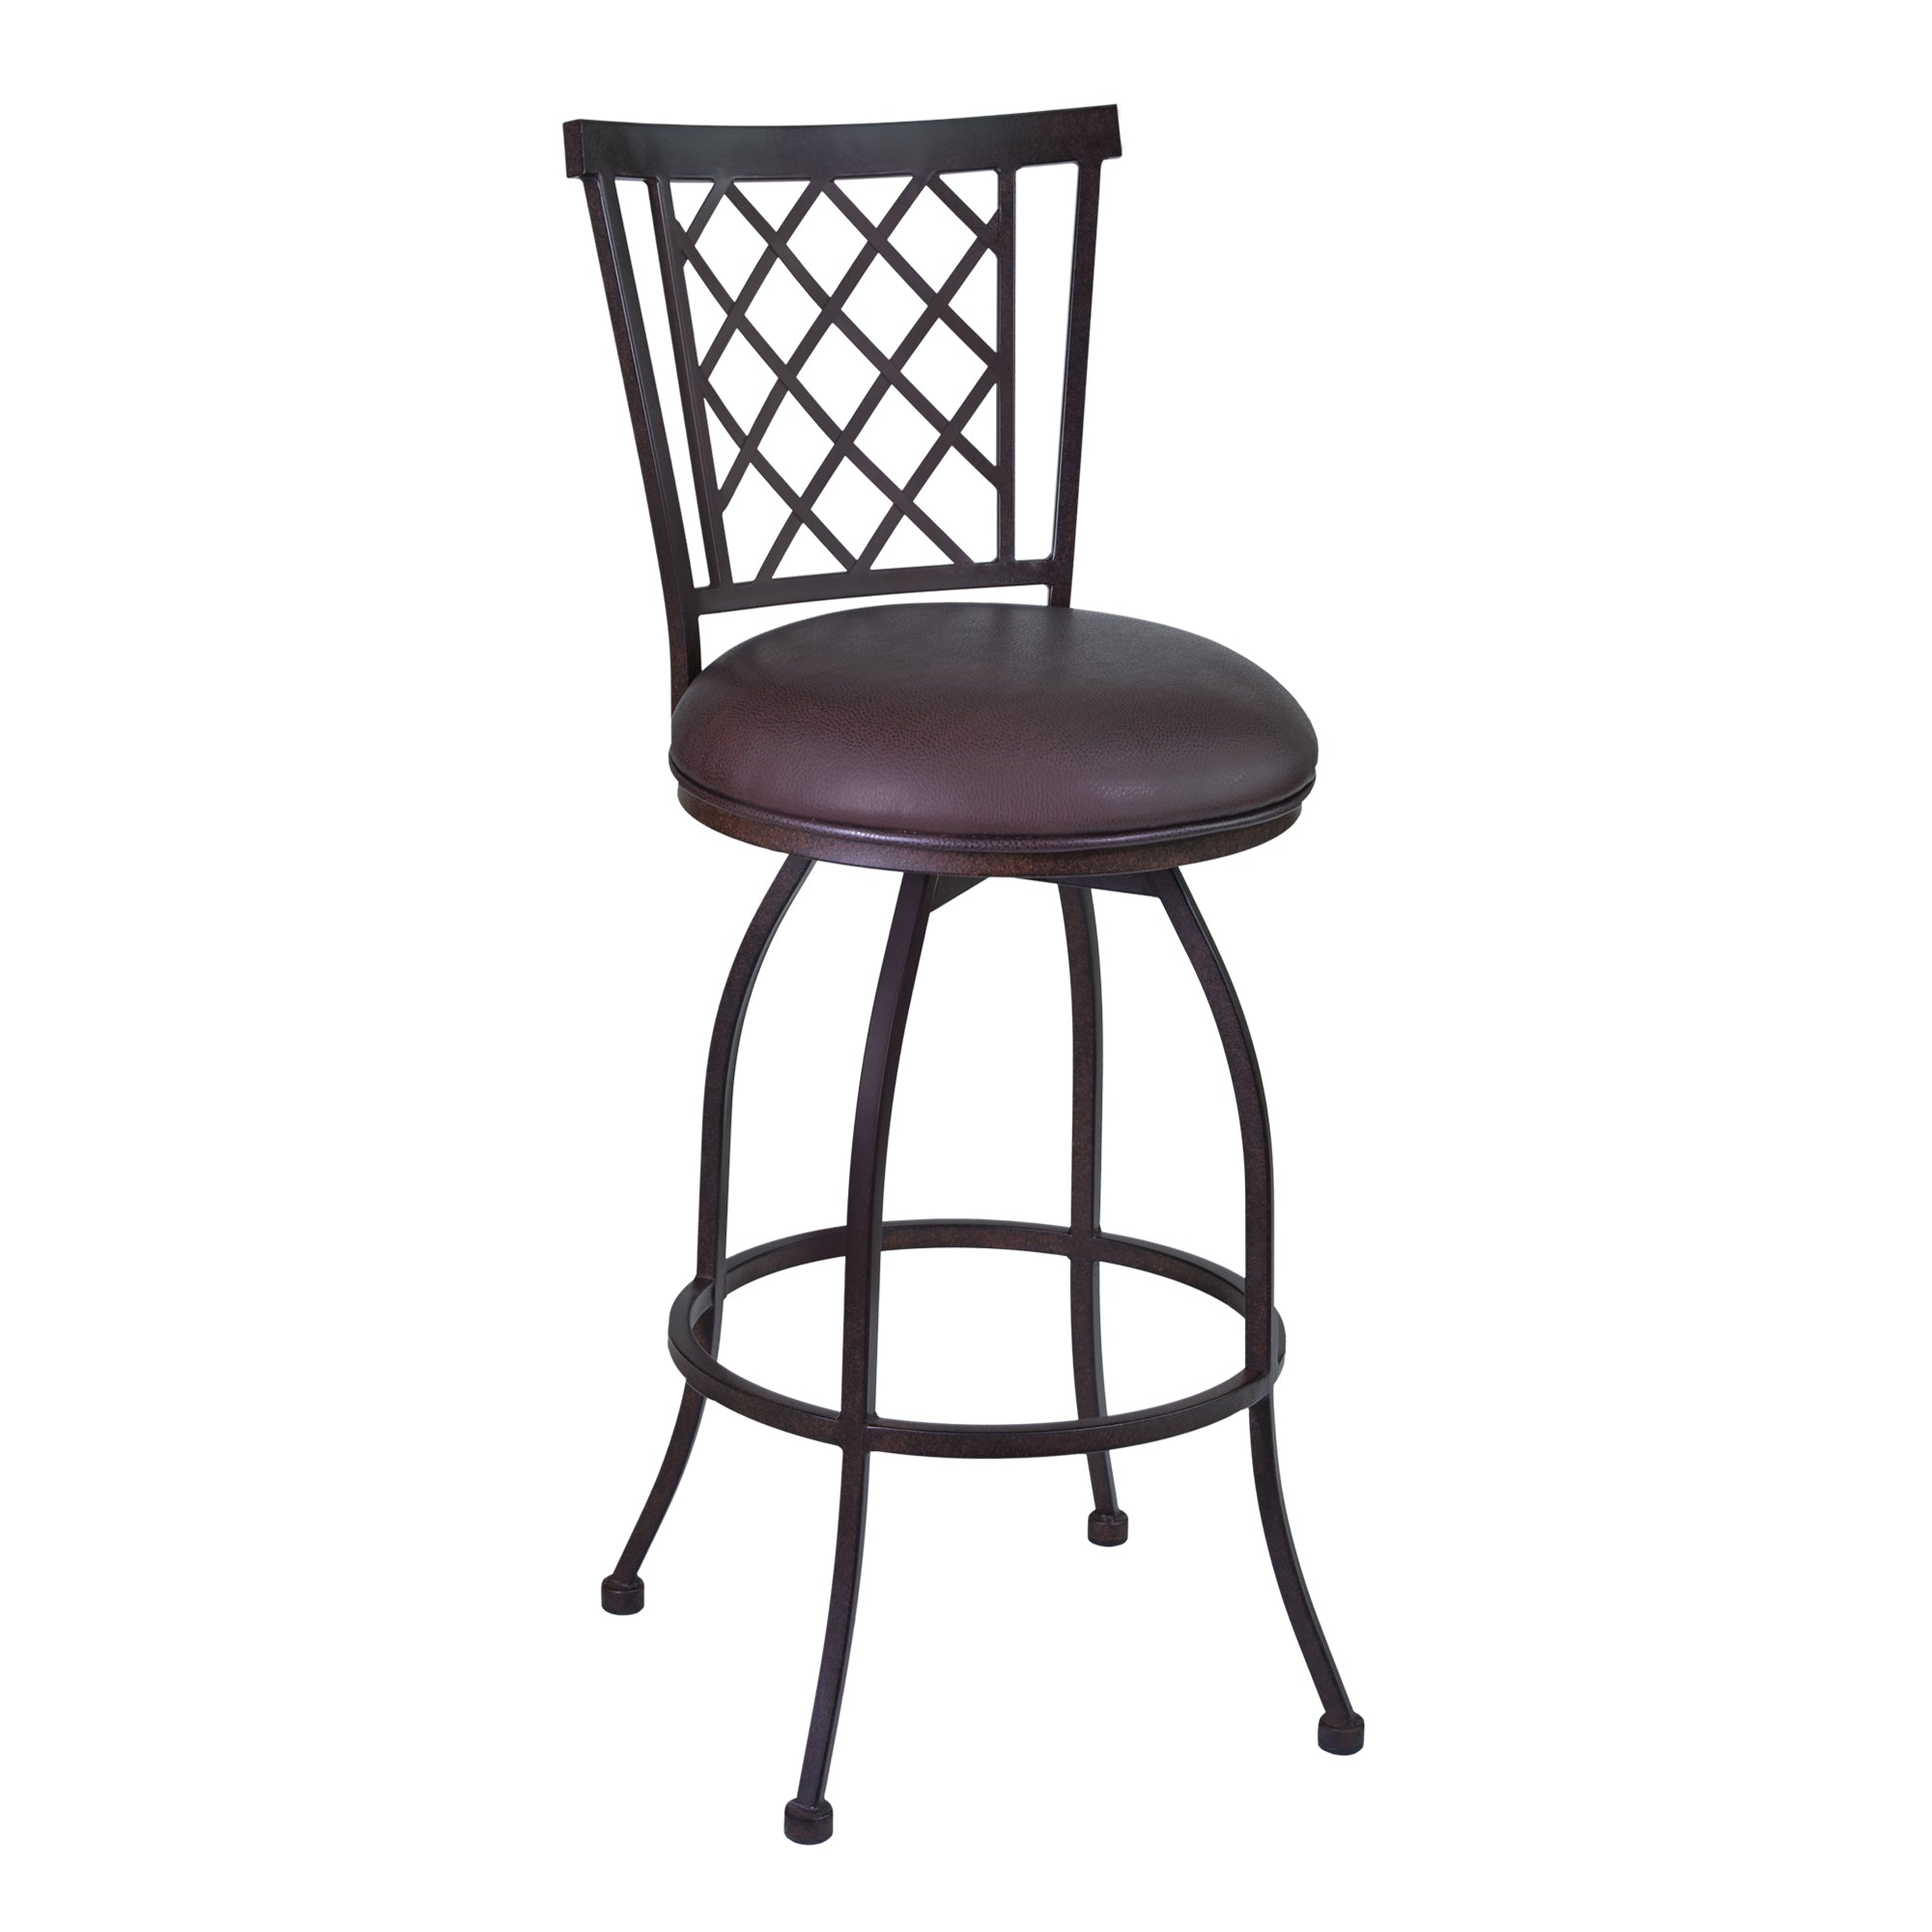 Armen Living LCRE30BABR Reno 30 Bar Height Barstool in Auburn Bay finish with Brown Faux Leather